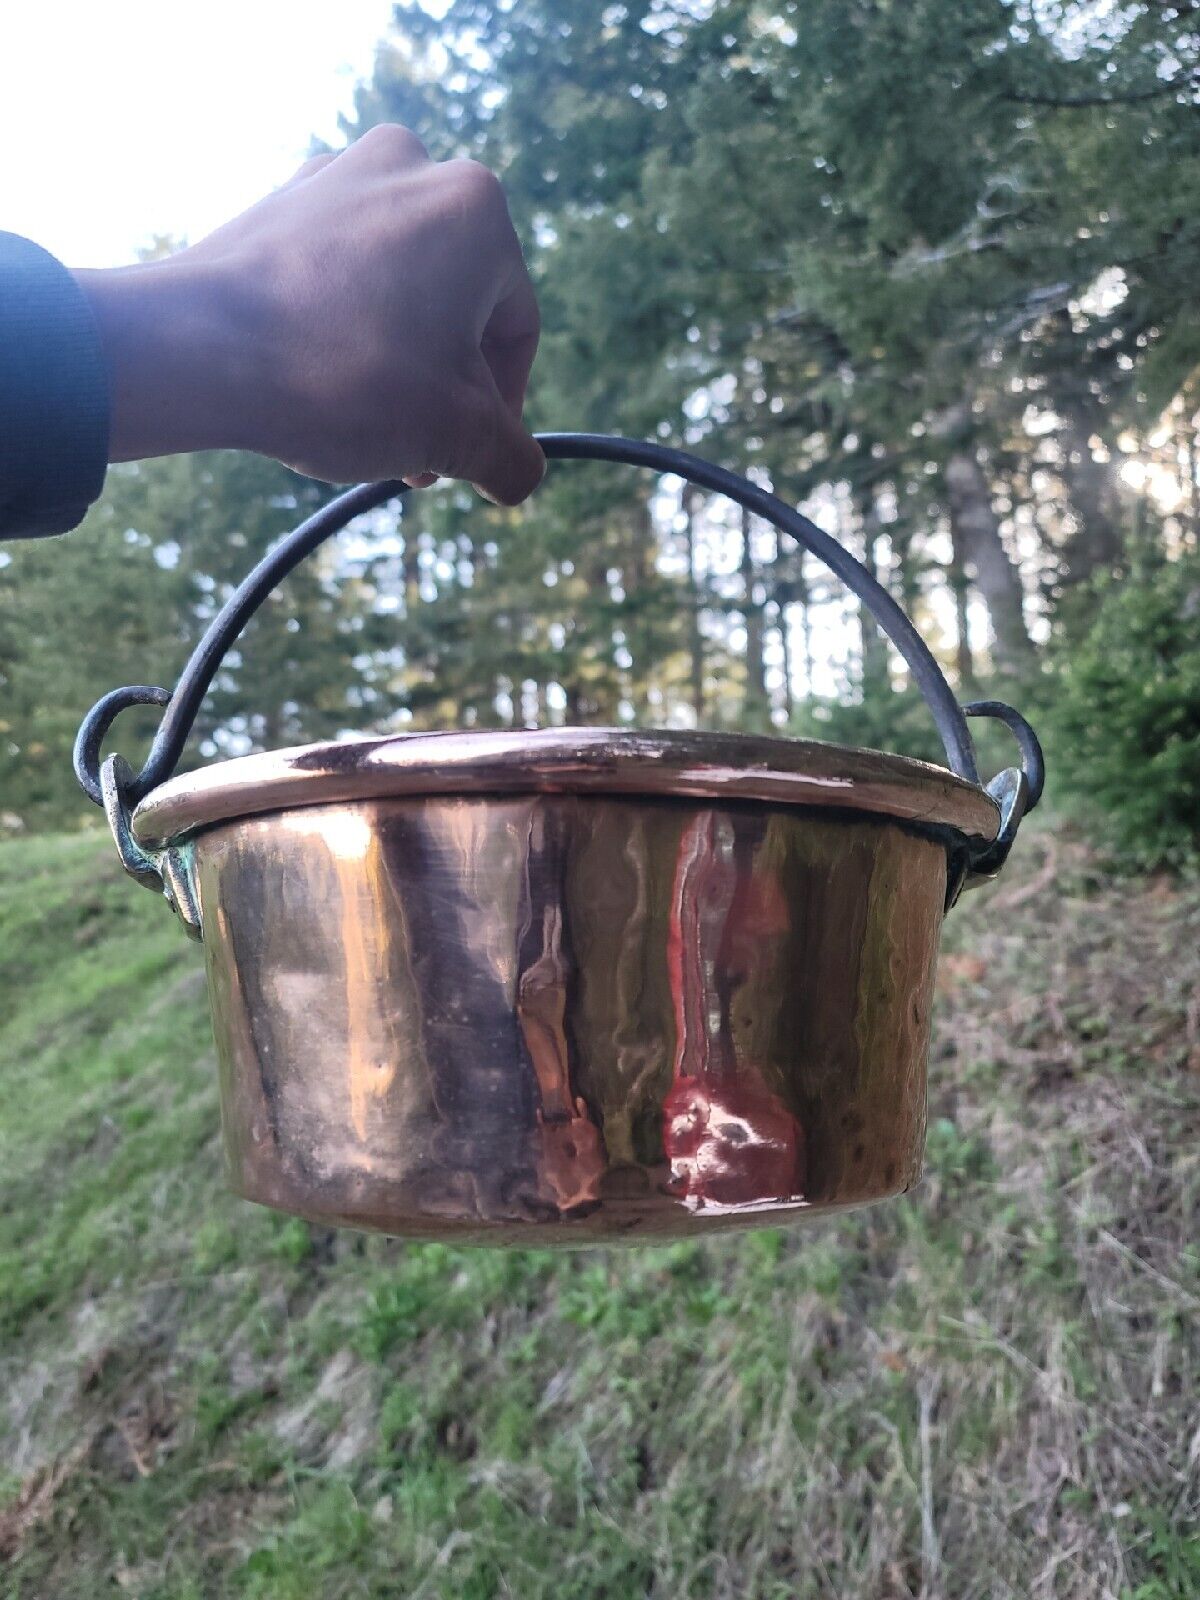 SPECTACULAR Old Handmade Copper Cauldron☆Thick Antique French Jam Pan◇4¼ Pounds